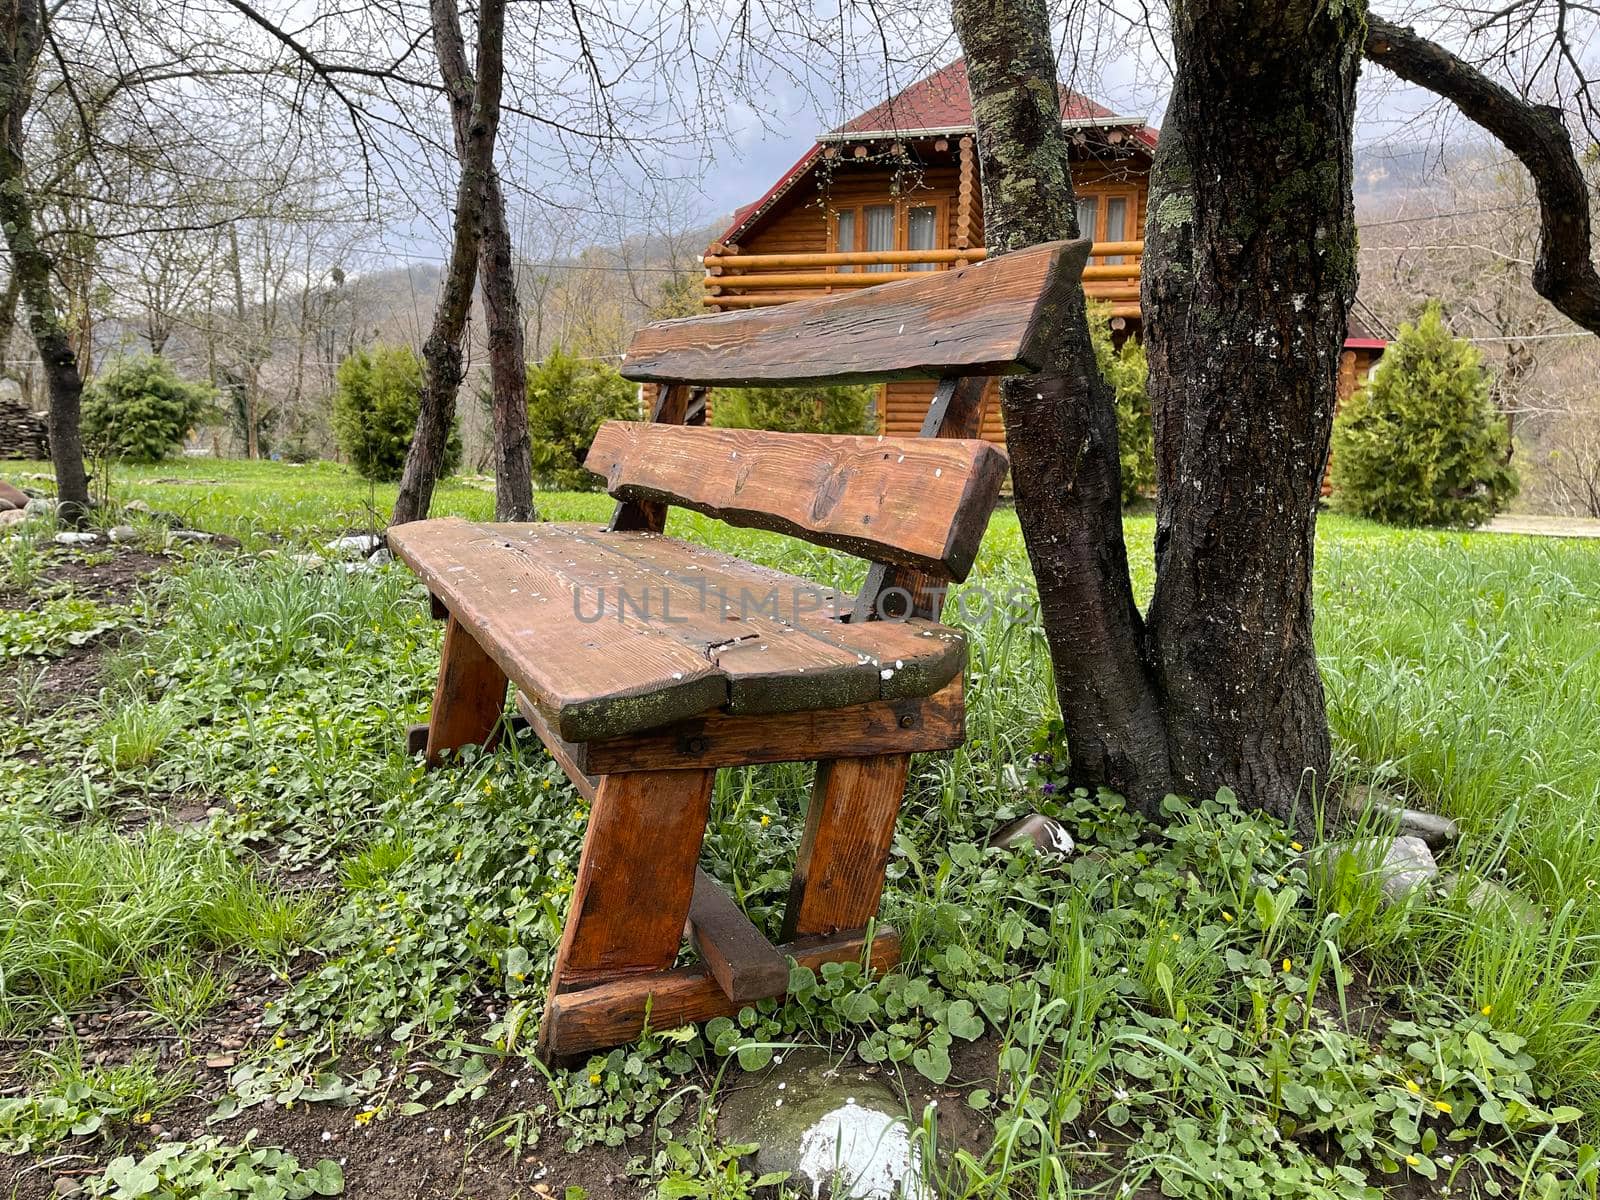 Close up of wooden bench near tree in countryside. Wooden pew on lawn for outdoor recreation